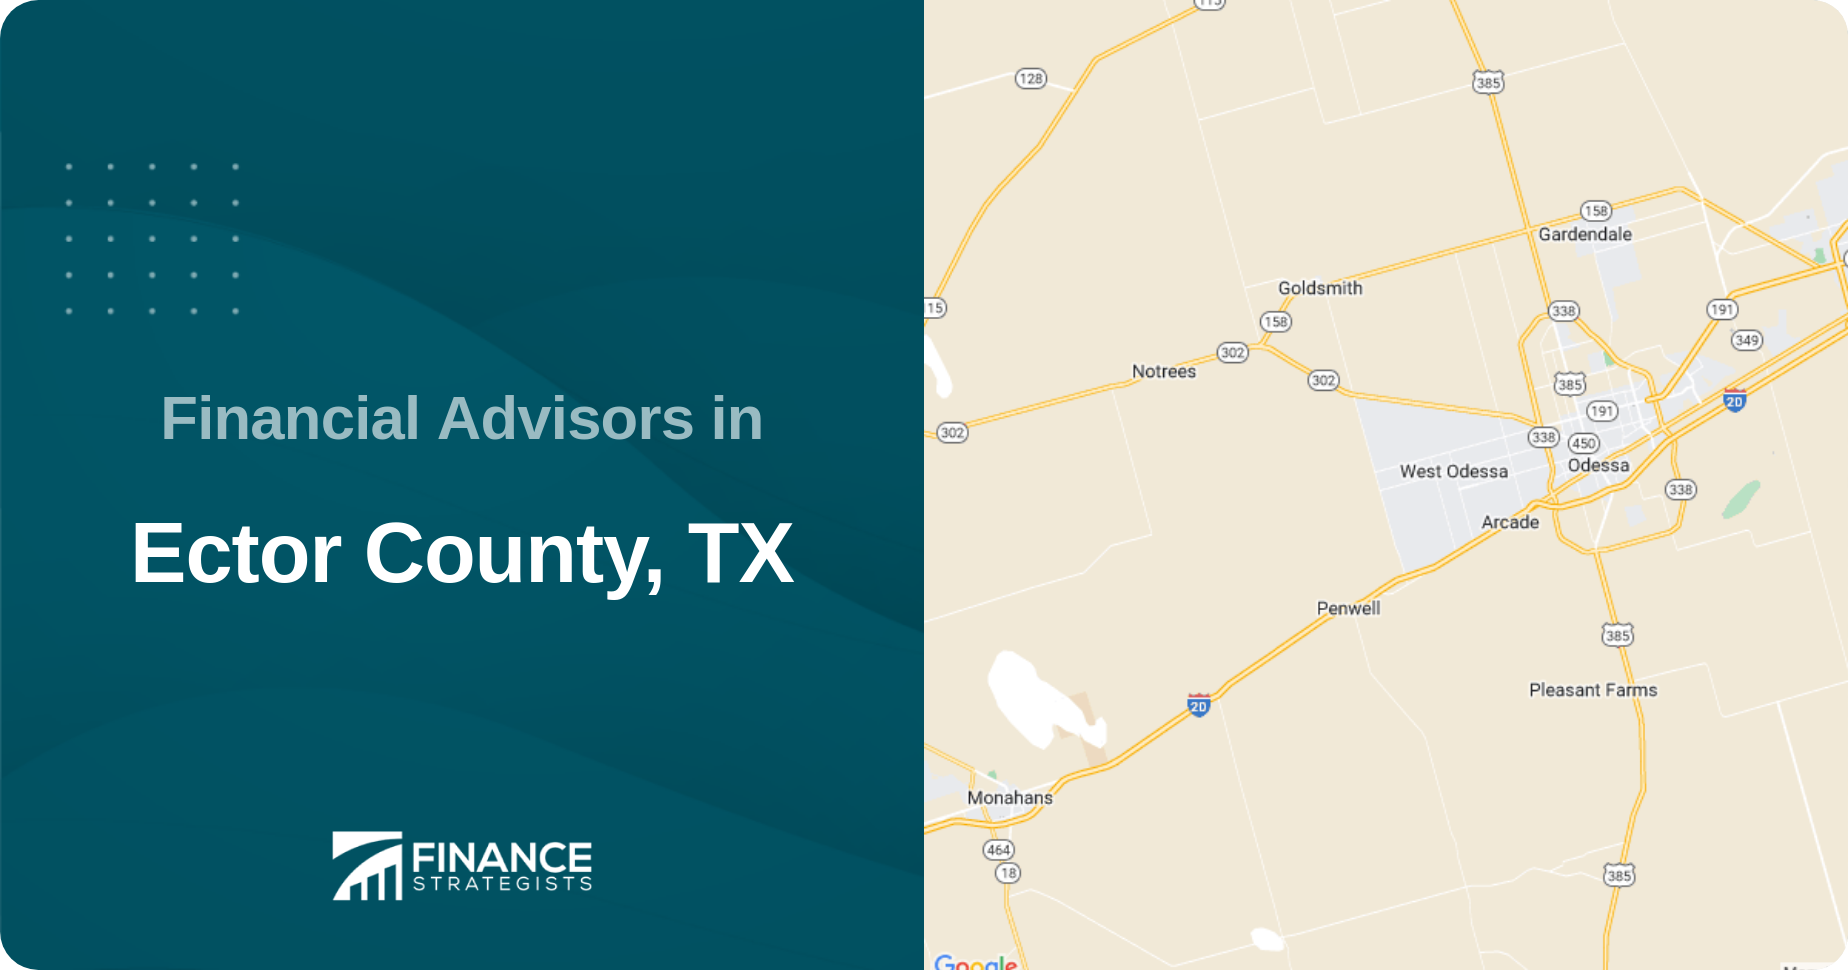 Financial Advisors in Ector County, TX